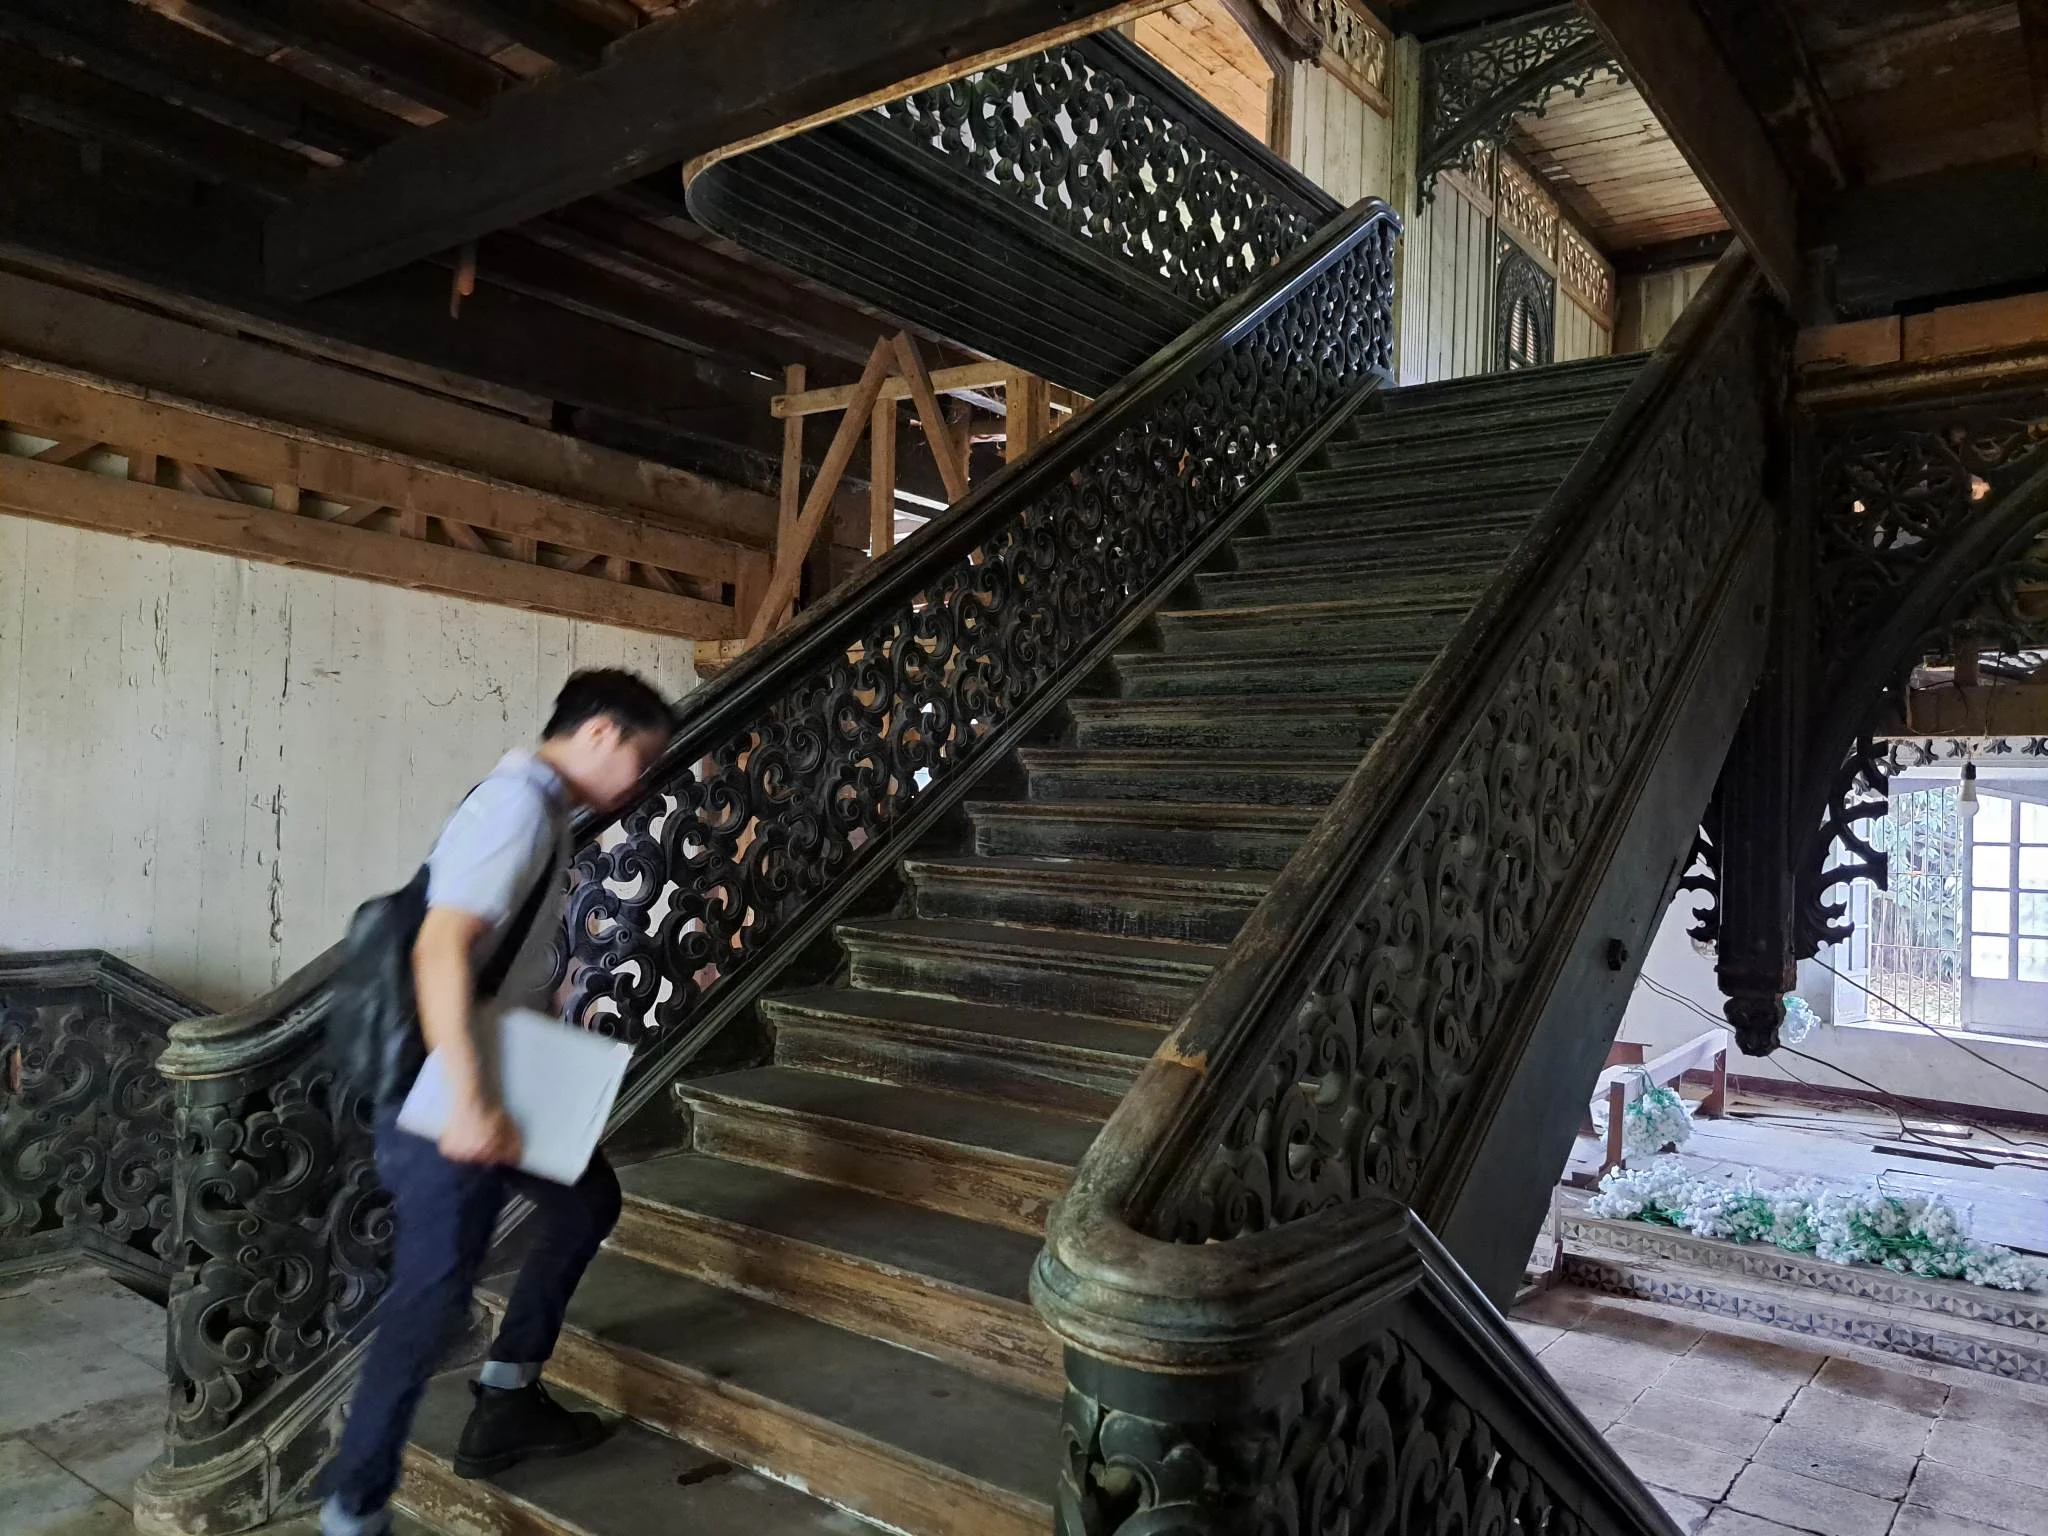 General Aniceto L. Lacson Ancestral House in Talisay City, Negros Occidental